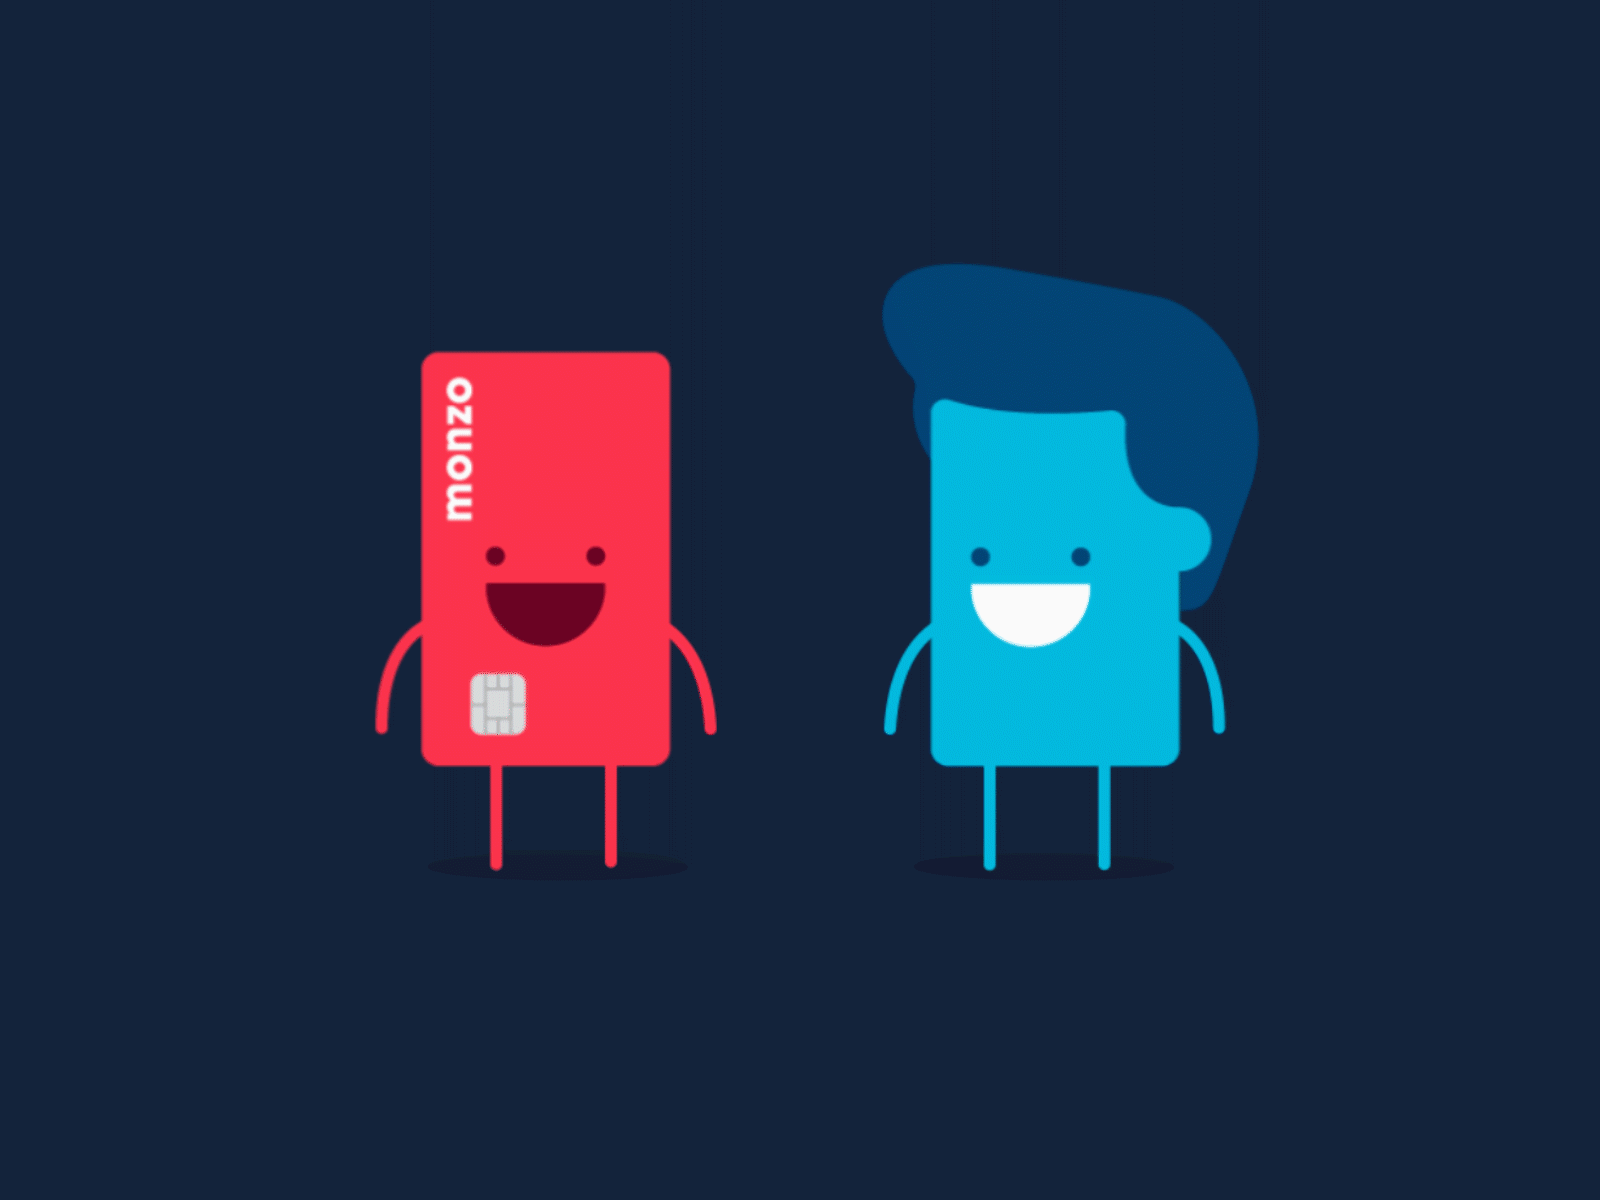 An animated GIF for Monzo, showing two cartoon bank cards giving a hi-five